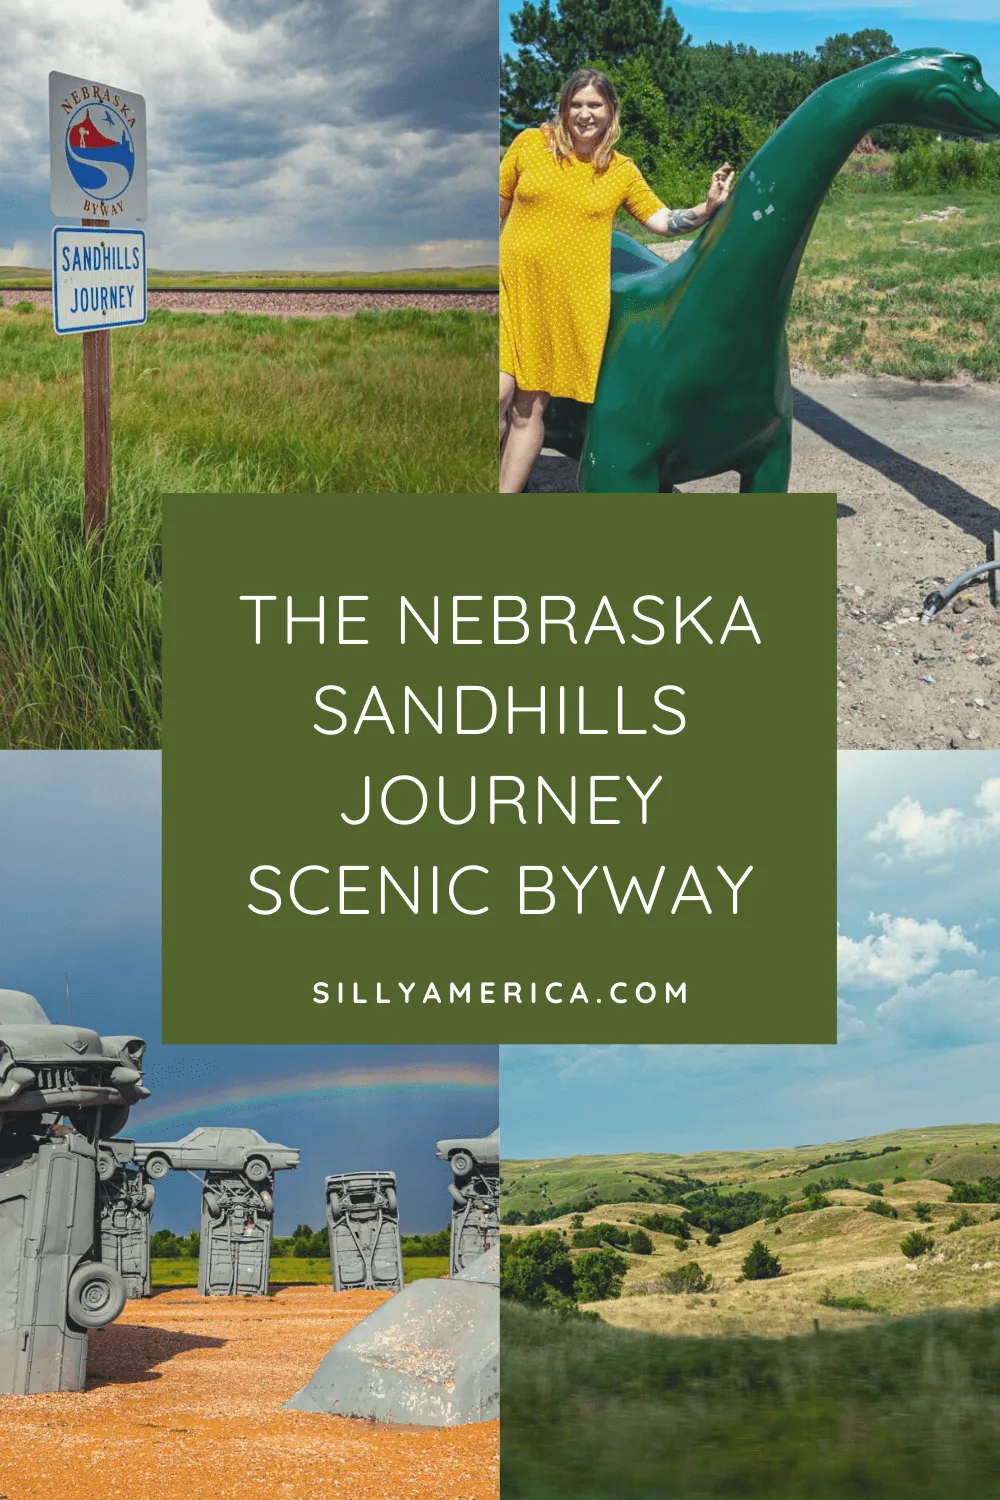 The Sandhills Journey Scenic Byway is a 272-mile road trip that takes you through some of the most breathtaking landscapes in Nebraska. The road, also known as Nebraska Highway 2, runs from Grand Island on the southeastern end to Alliance on the northwestern end. #NebraskaRoadsideAttractions #NebraskaRoadsideAttraction #RoadsideAttractions #RoadsideAttraction #RoadTrip #NebraskaRoadTrip #ThingsToDoInNebraska #NebraskaRoadTripWithKids #NebraskaTravelRoadTrips #ThingsToSeeInNebraska